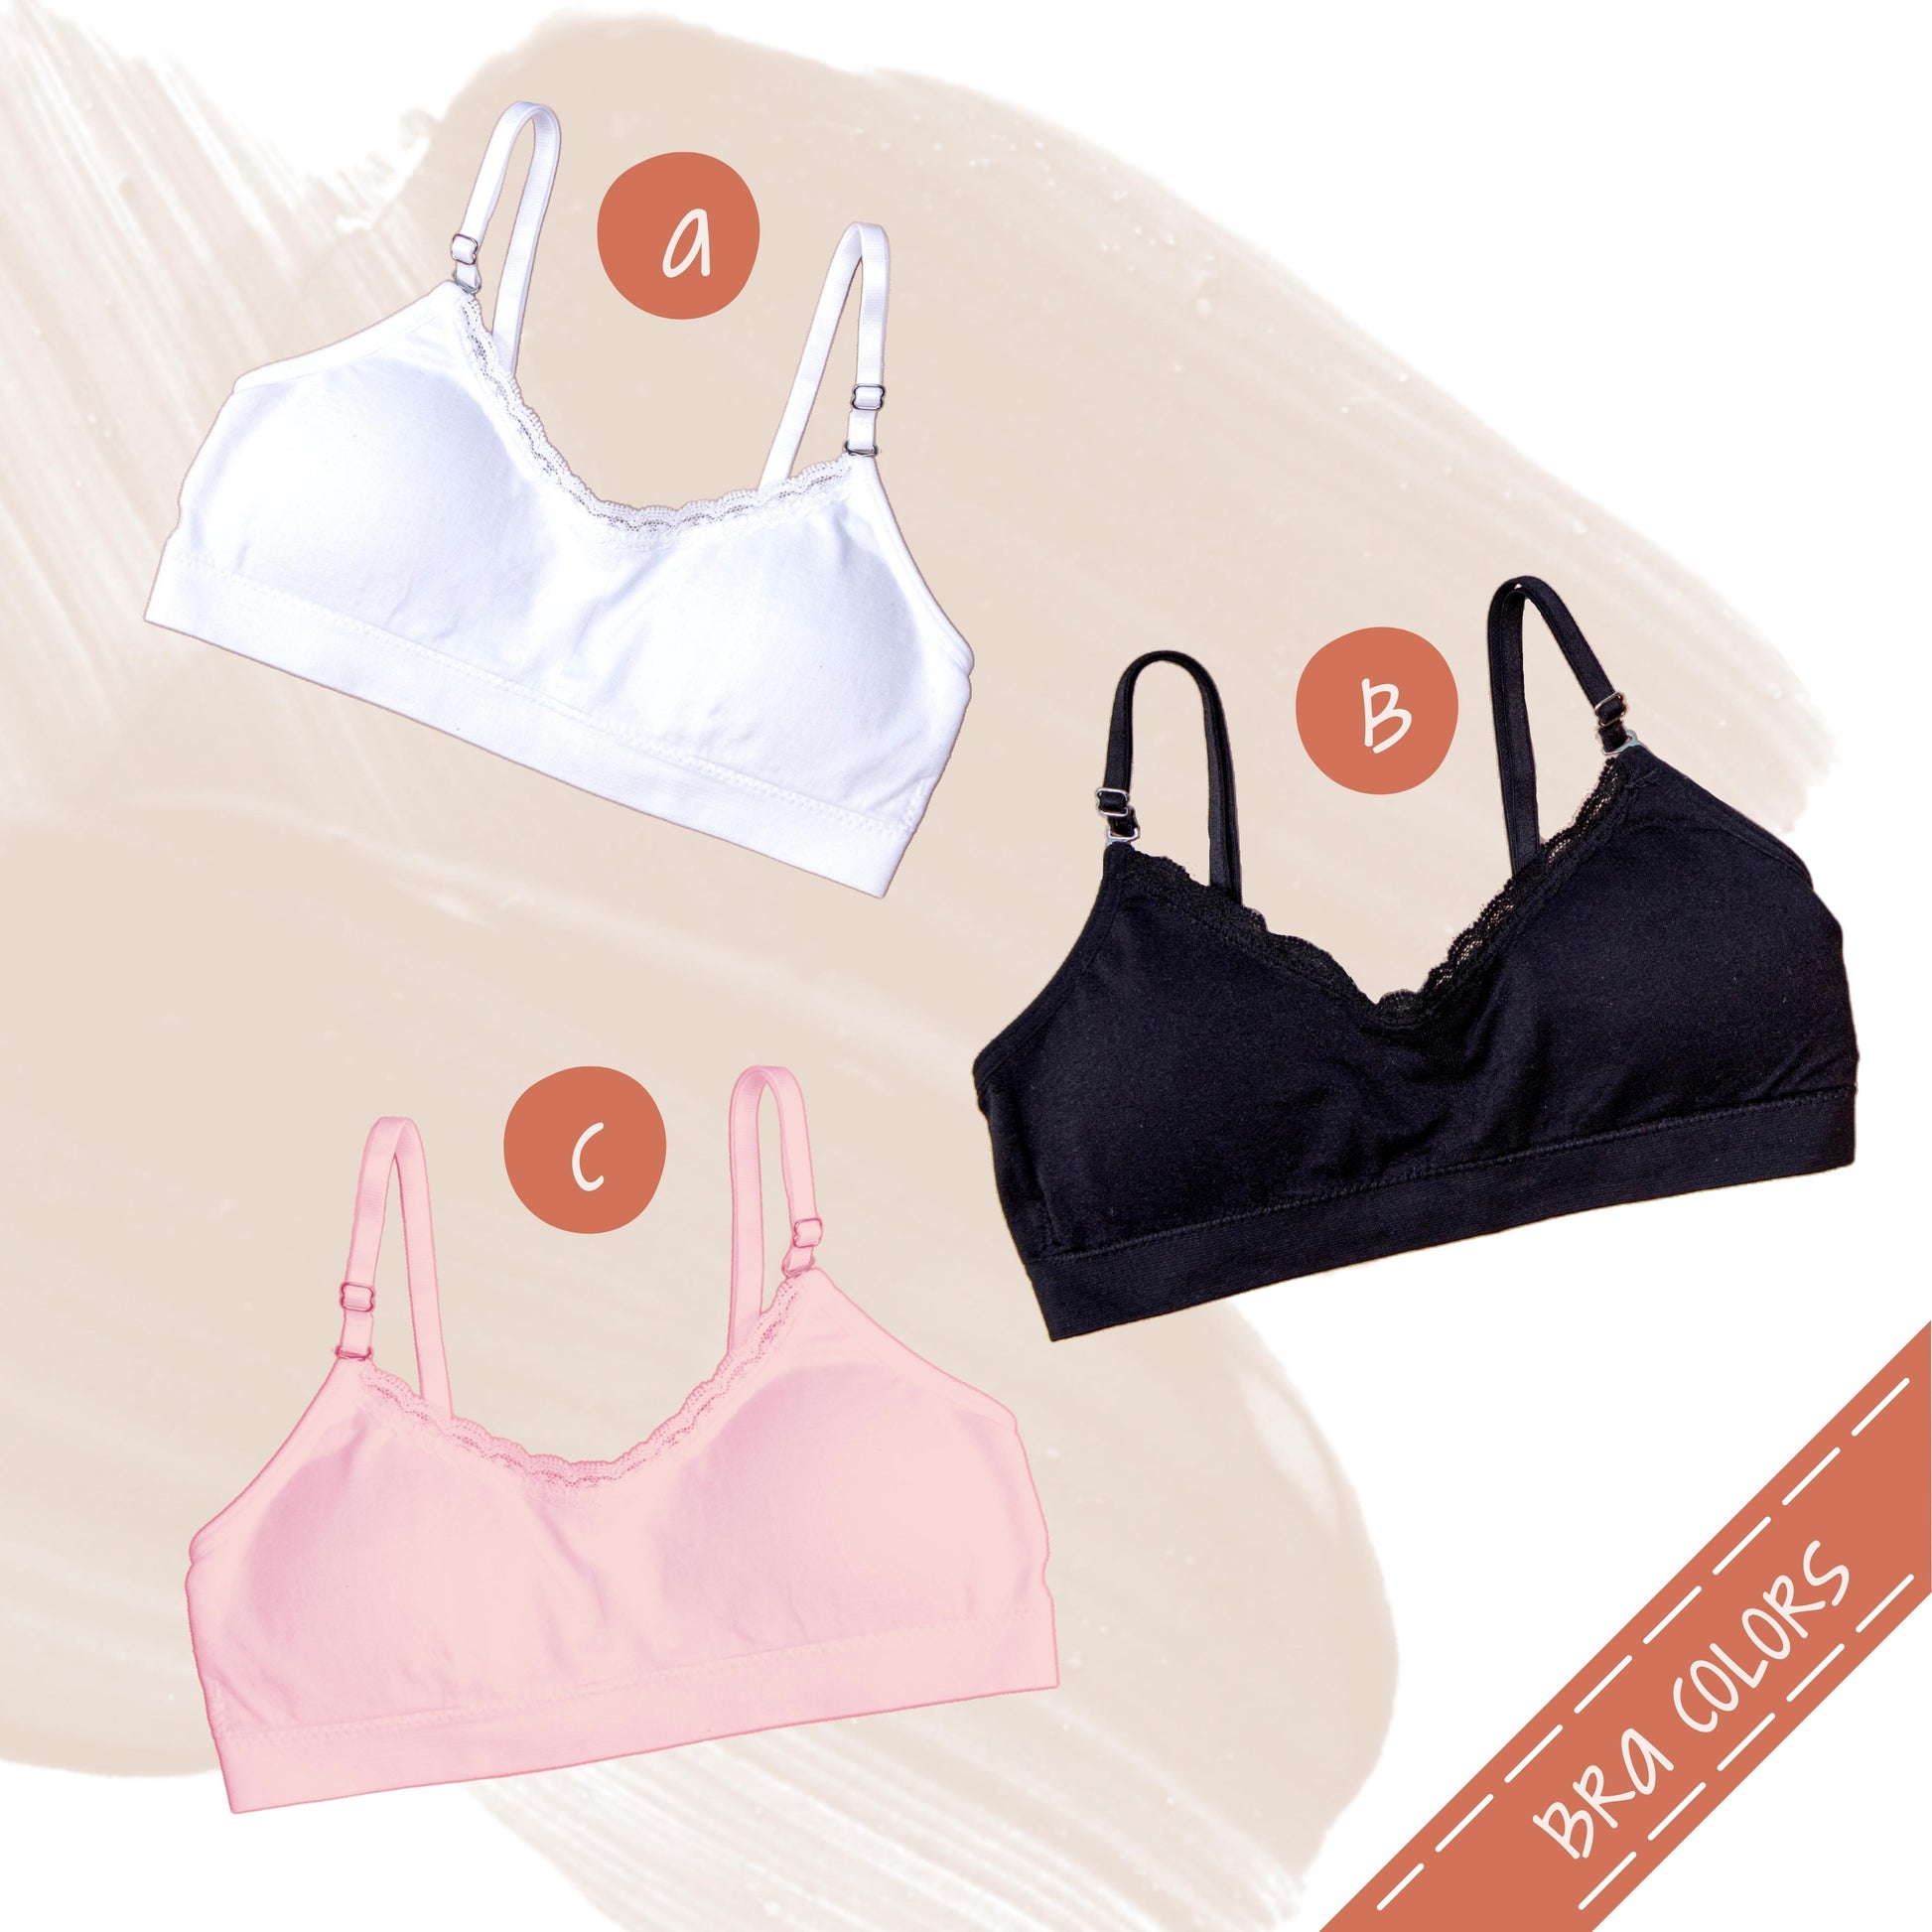 Best Seamless Bra for young women, girls, teens and tweens. - Yellowberry